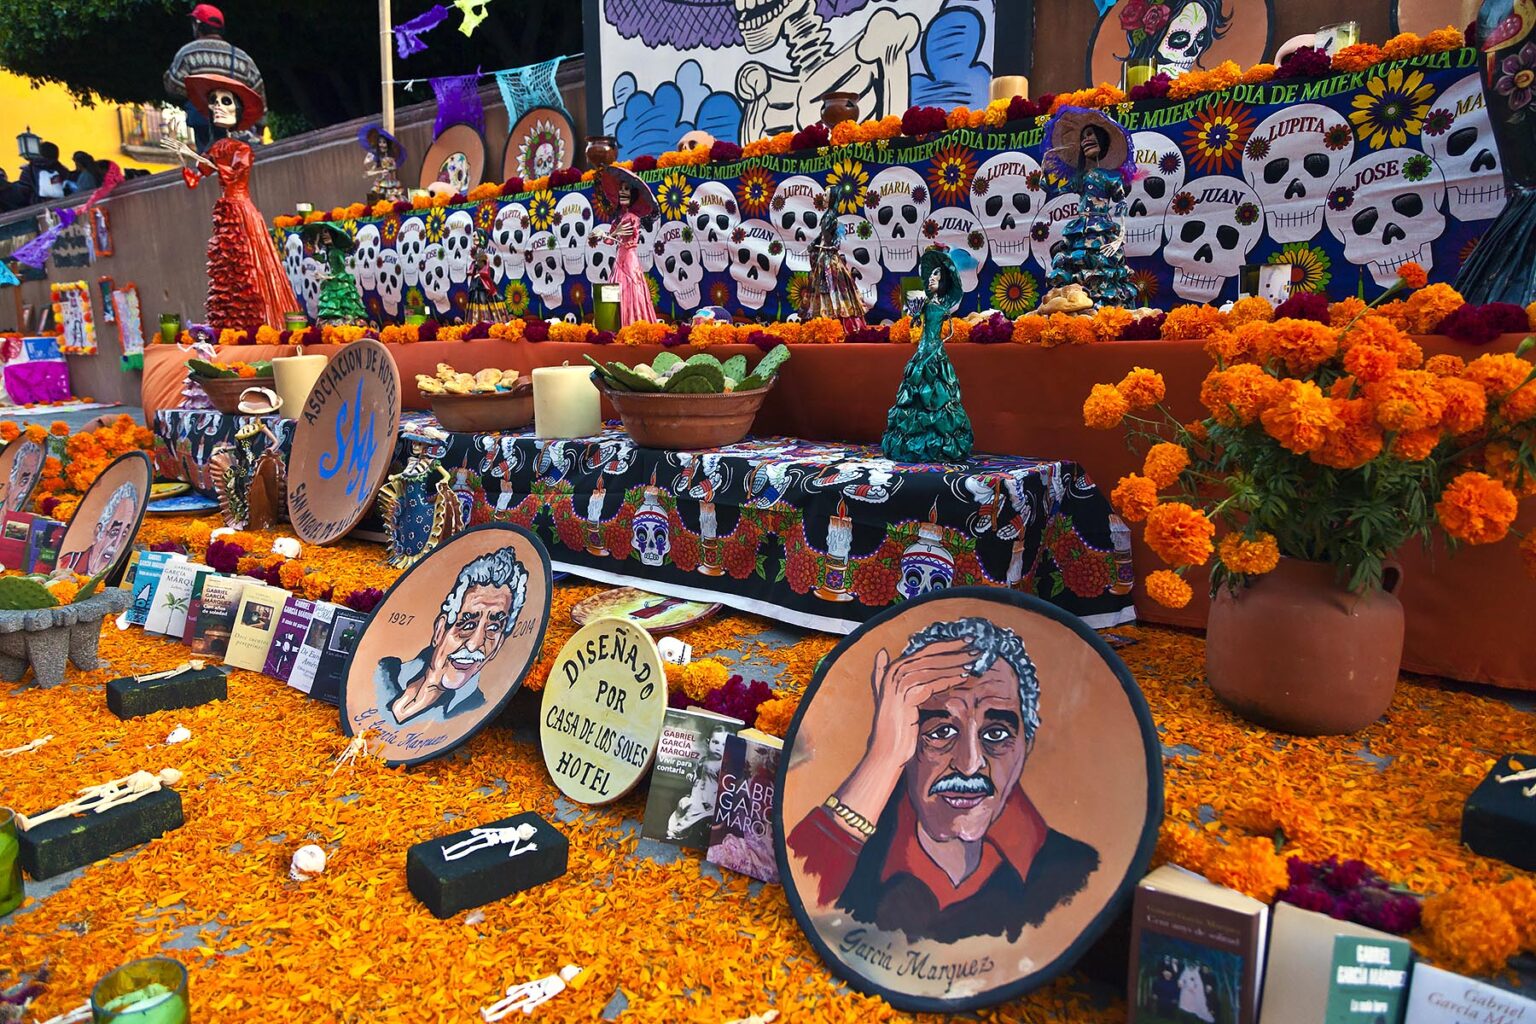 An ALTAR for the author GARCIA MARQUEZ  in the JARDIN during DAY OF THE DEAD 2014 -  SAN MIGUEL DE ALLENDE, MEXICO